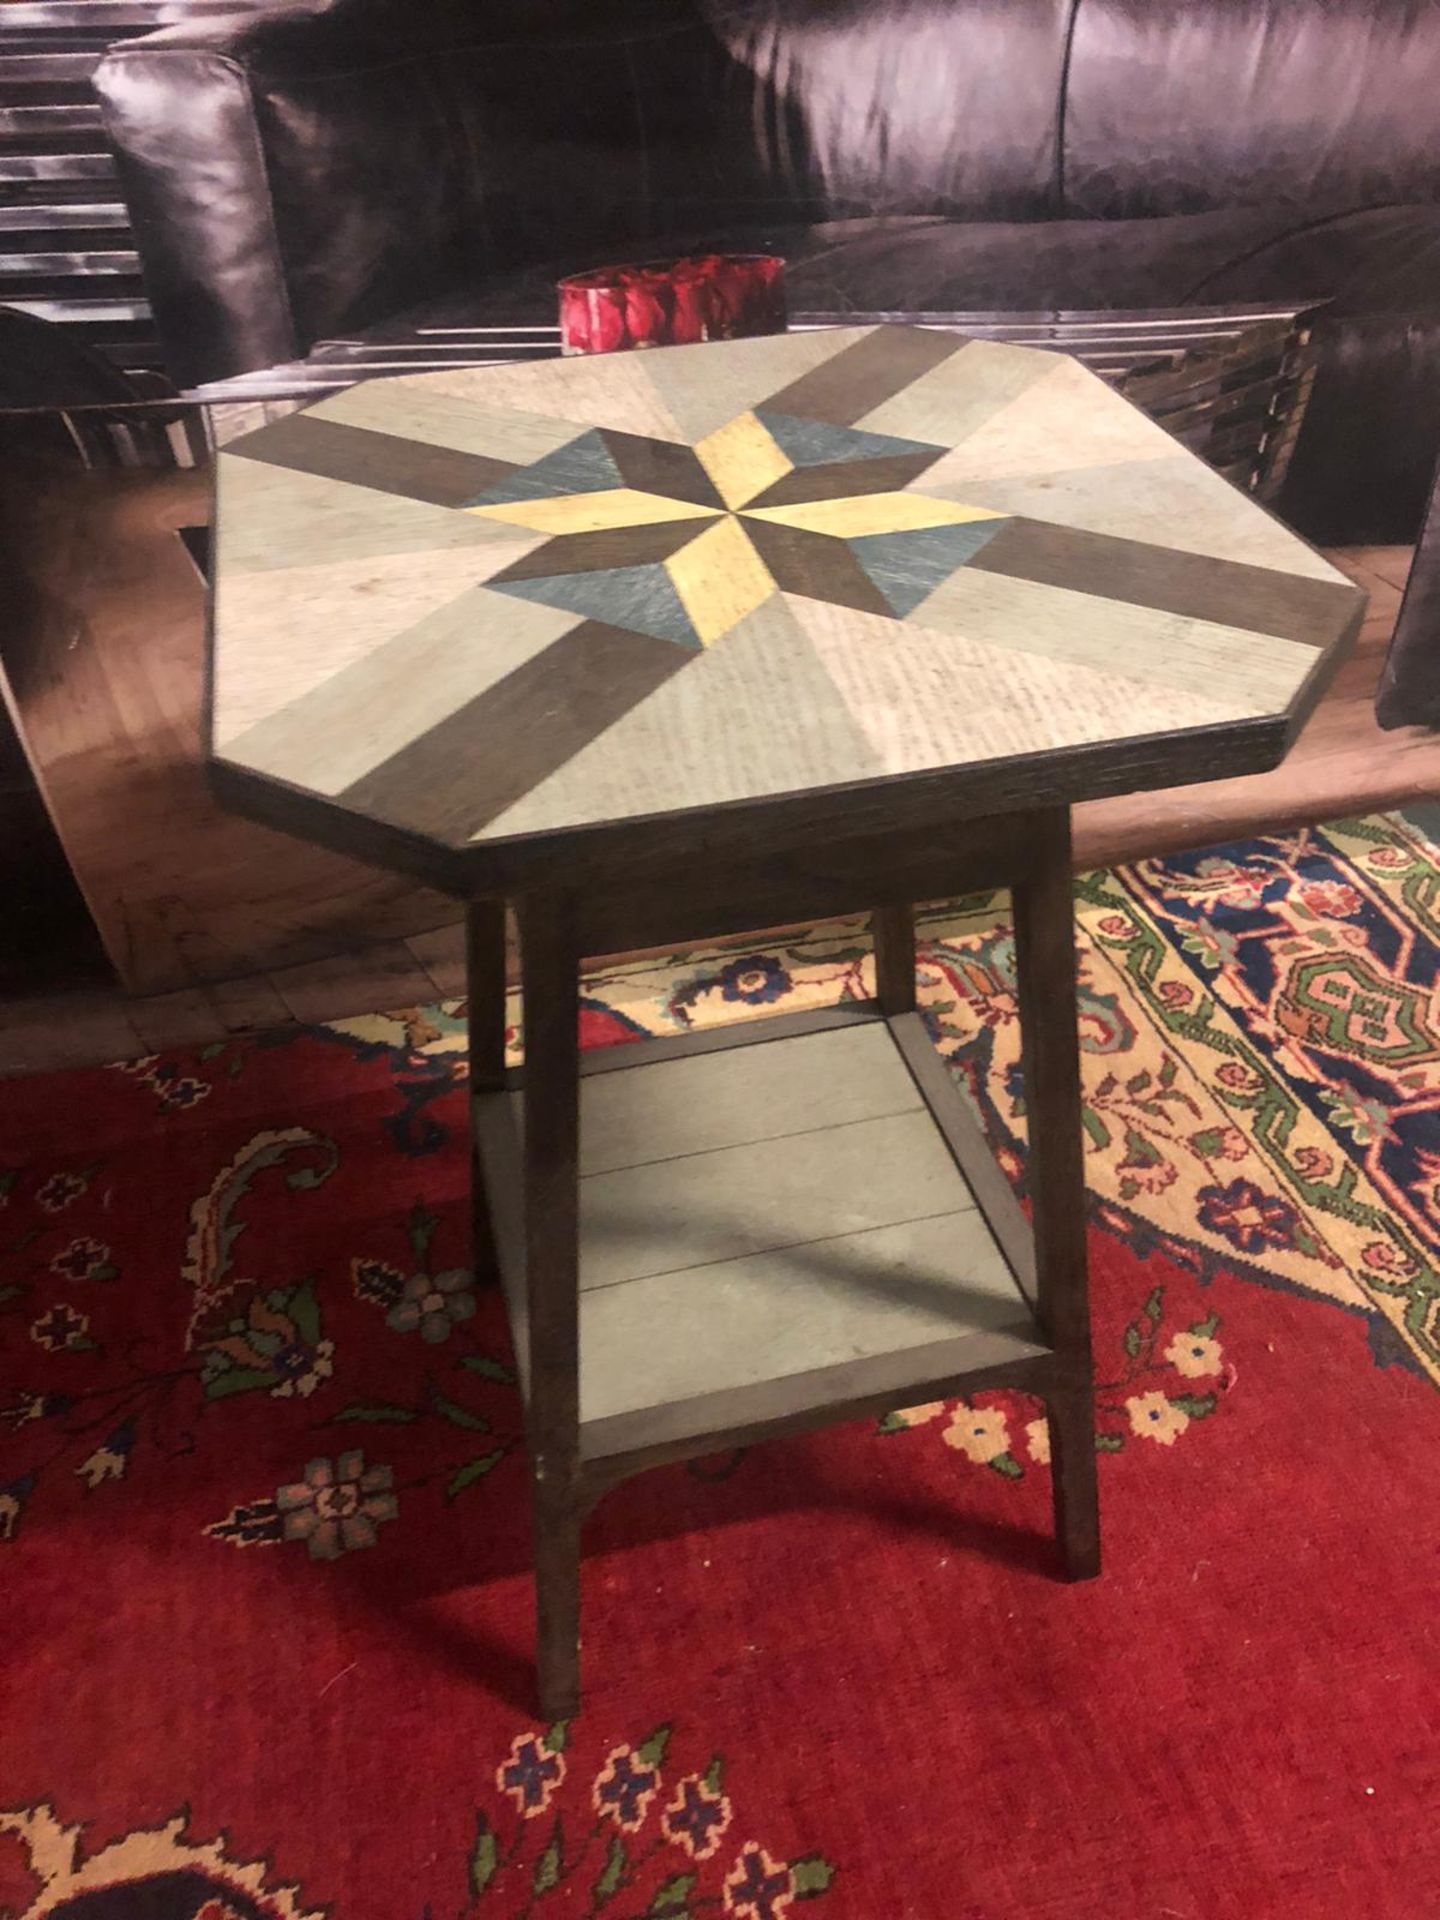 Geometric Top Side Table With Undershelf Works Great As A Lamp TableÃƒâ€š From Sideshow To Show-